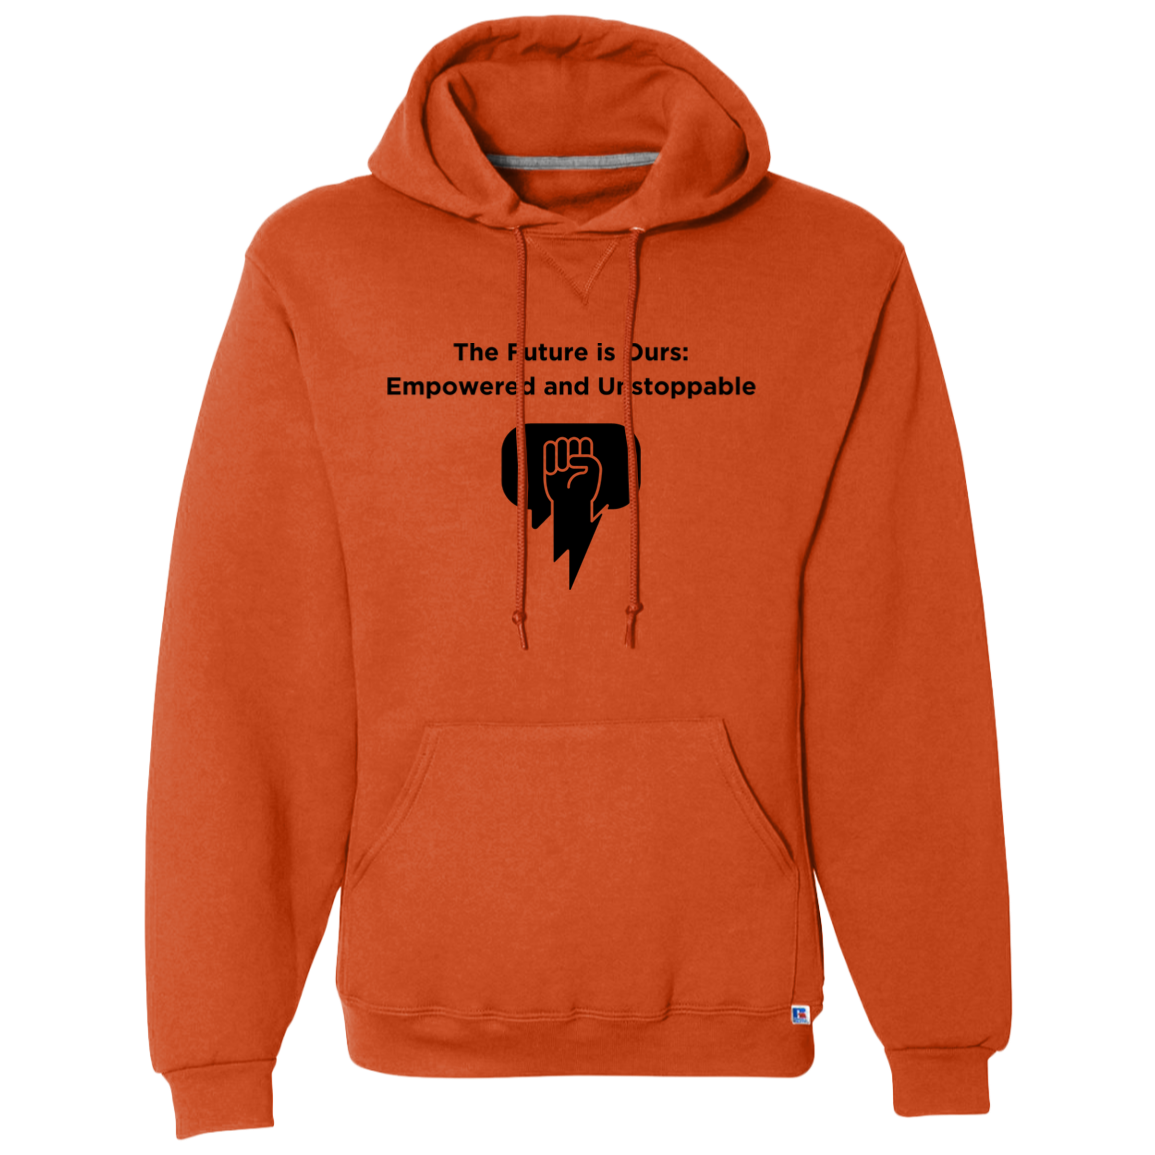 The Future is Ours 4 Dri-Power Fleece Pullover Hoodie